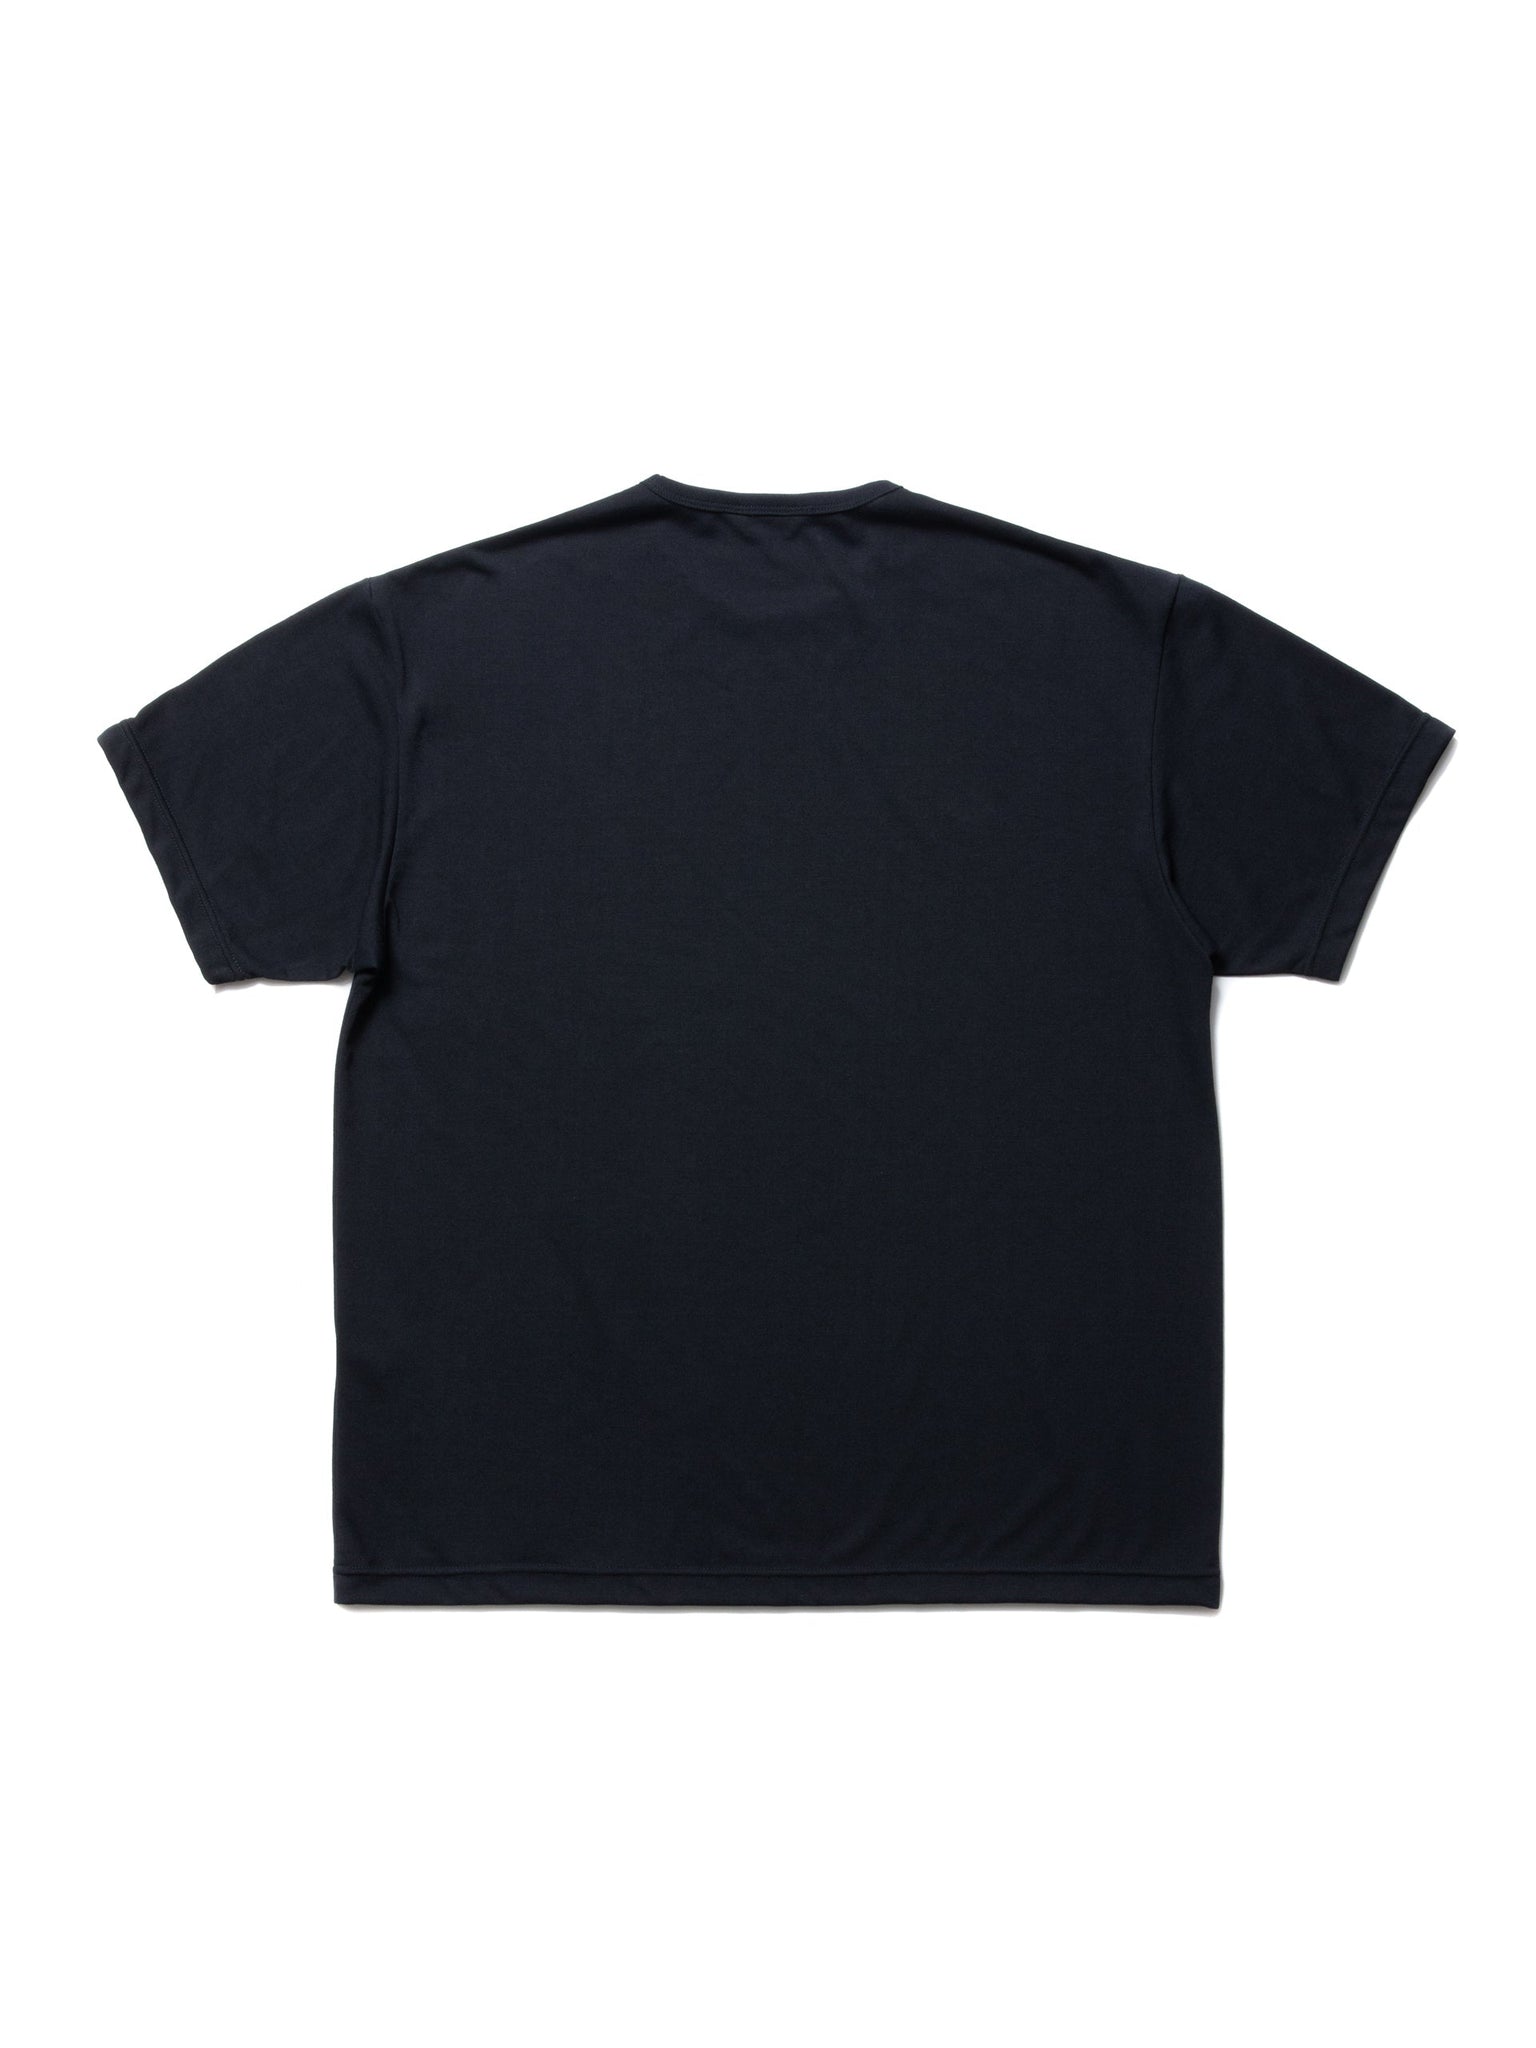 Dry Tech Jersey Relax Fit S/S Tee